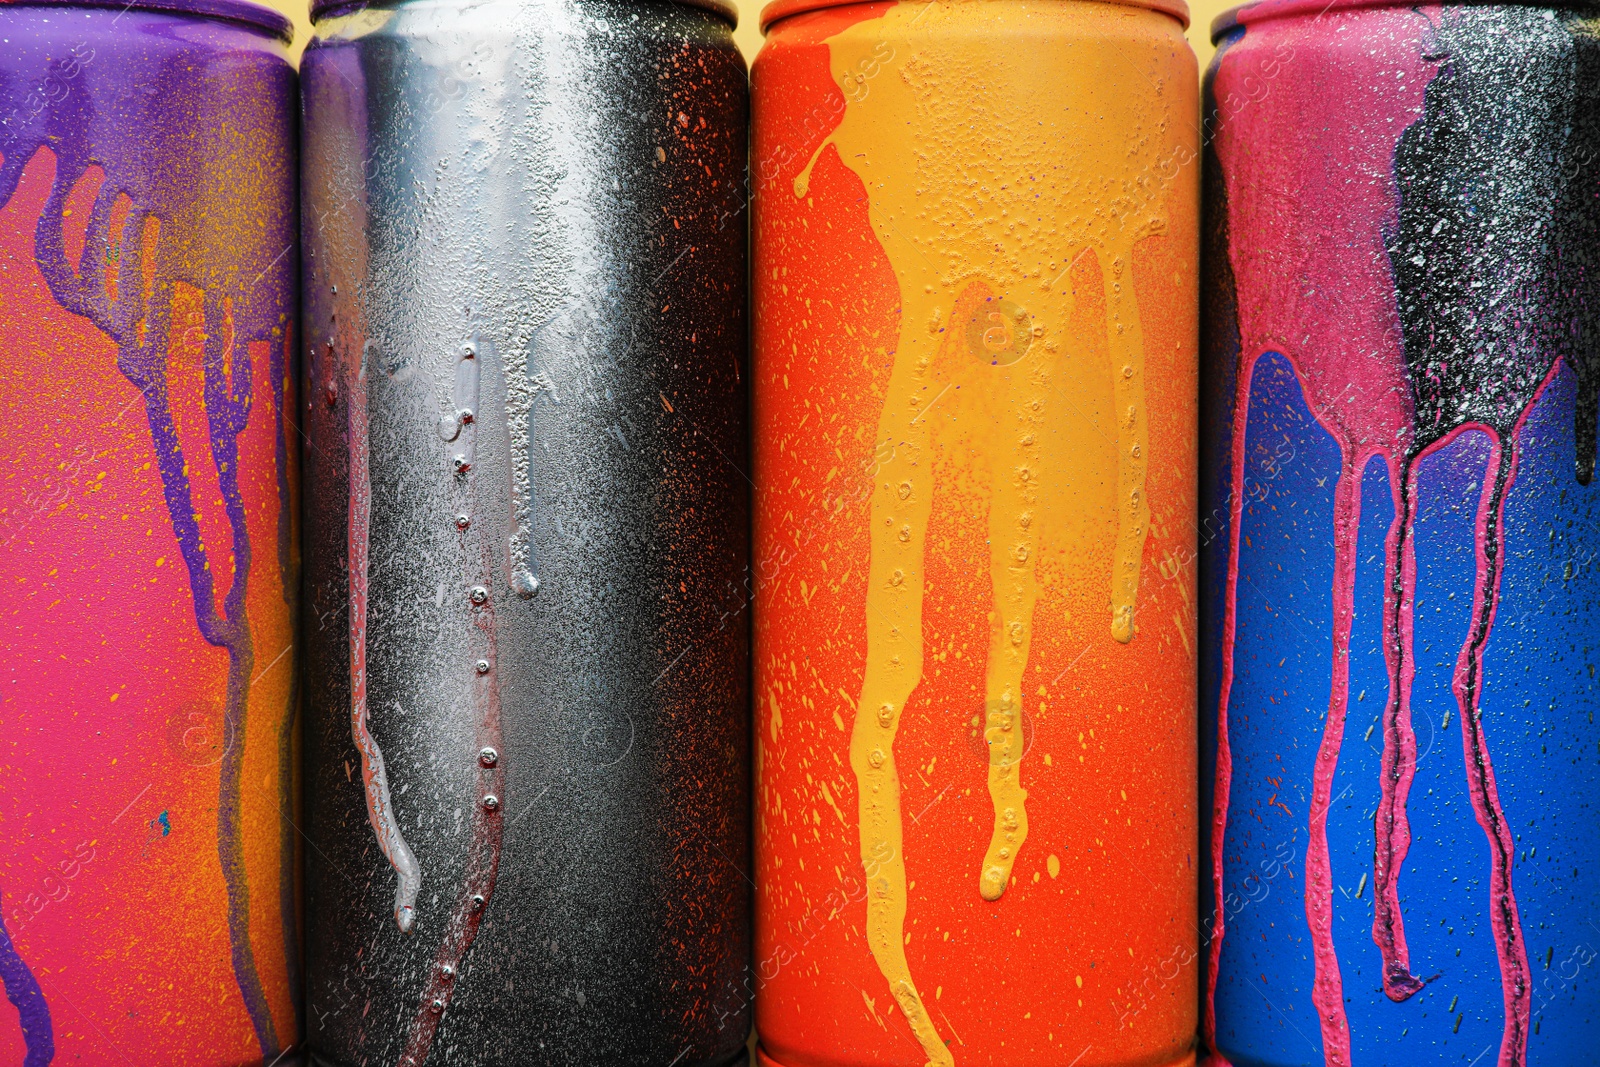 Photo of Used cans of spray paints as background, top view. Graffiti supplies